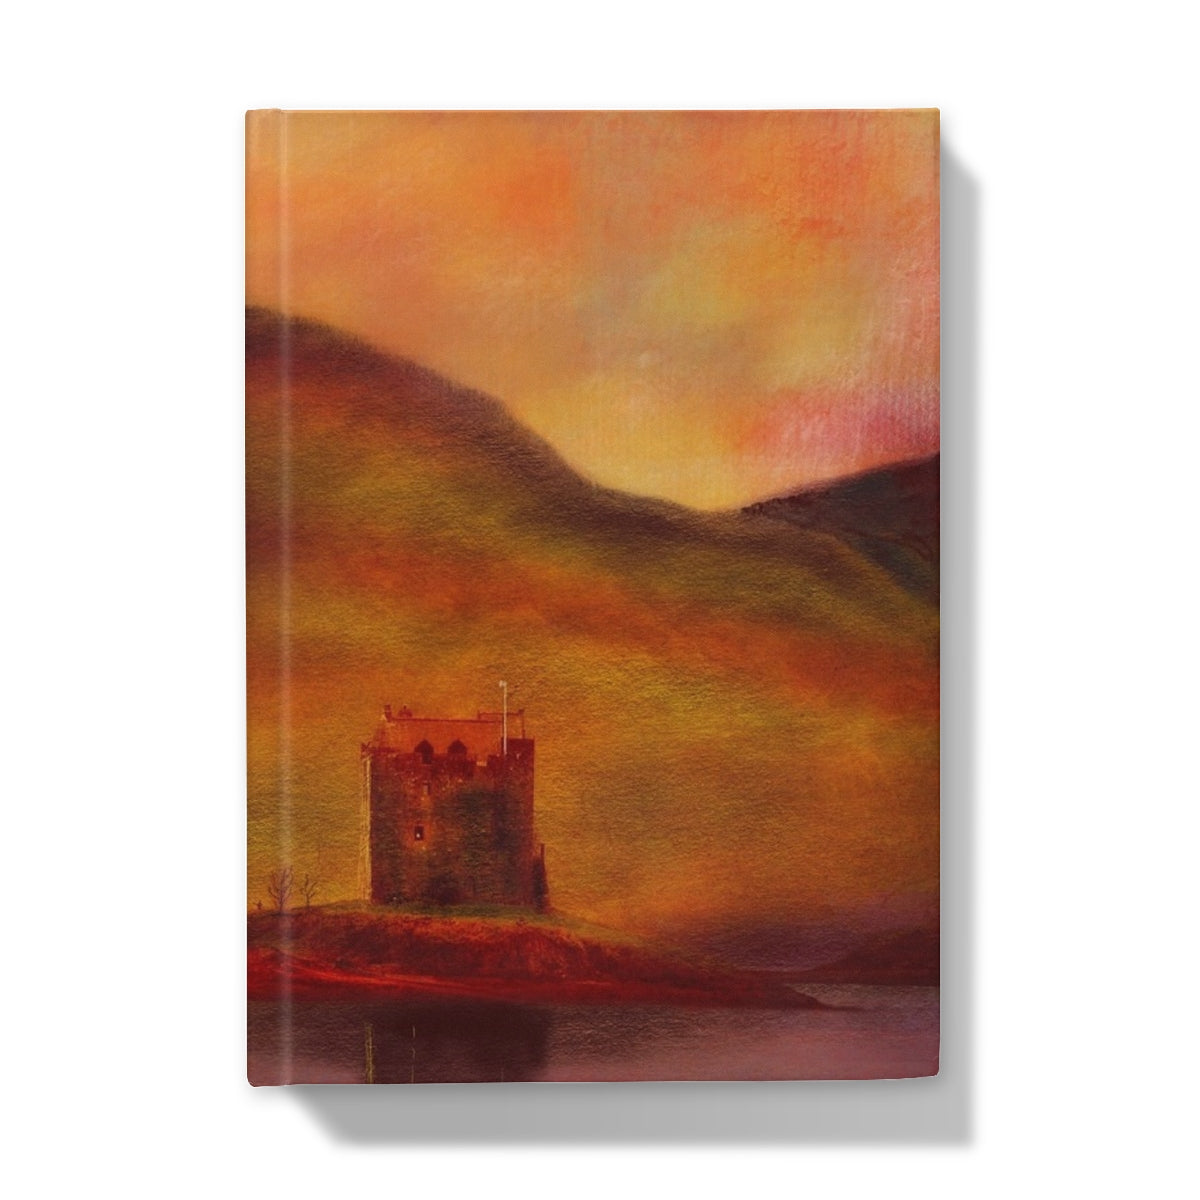 Castle Stalker Sunset Art Gifts Hardback Journal-Journals & Notebooks-Historic & Iconic Scotland Art Gallery-5"x7"-Lined-Paintings, Prints, Homeware, Art Gifts From Scotland By Scottish Artist Kevin Hunter